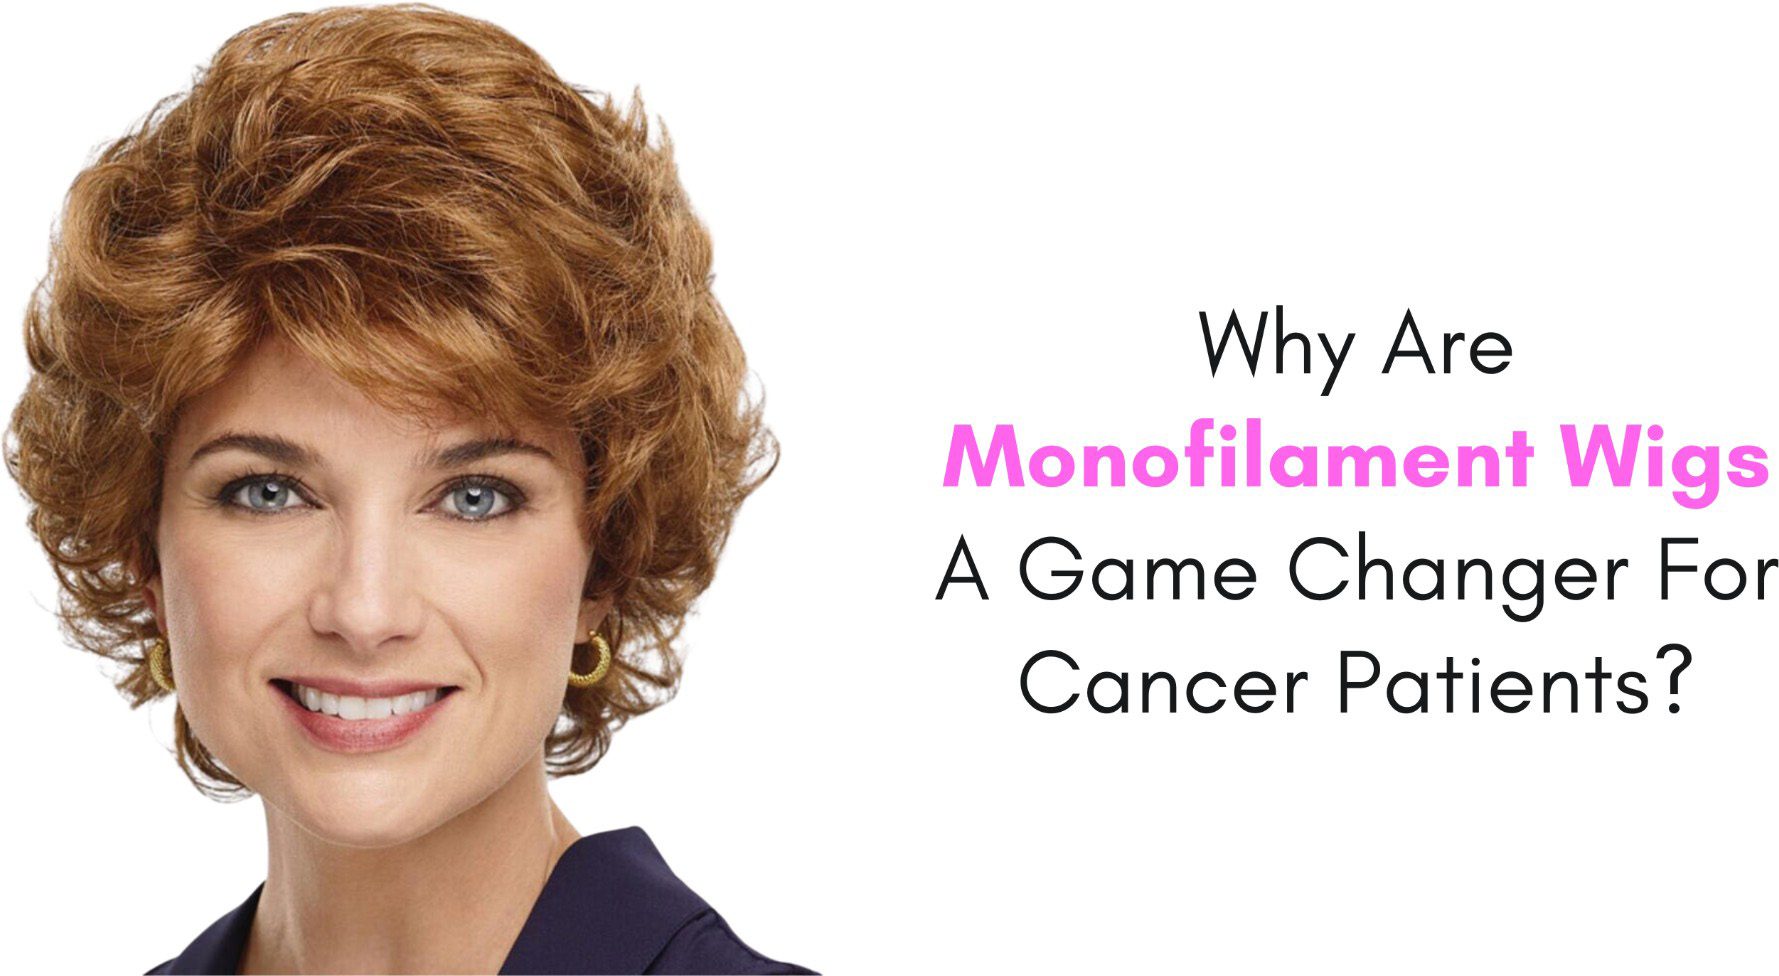 Why Are Monofilament Wigs A Game Changer For Cancer Patients?